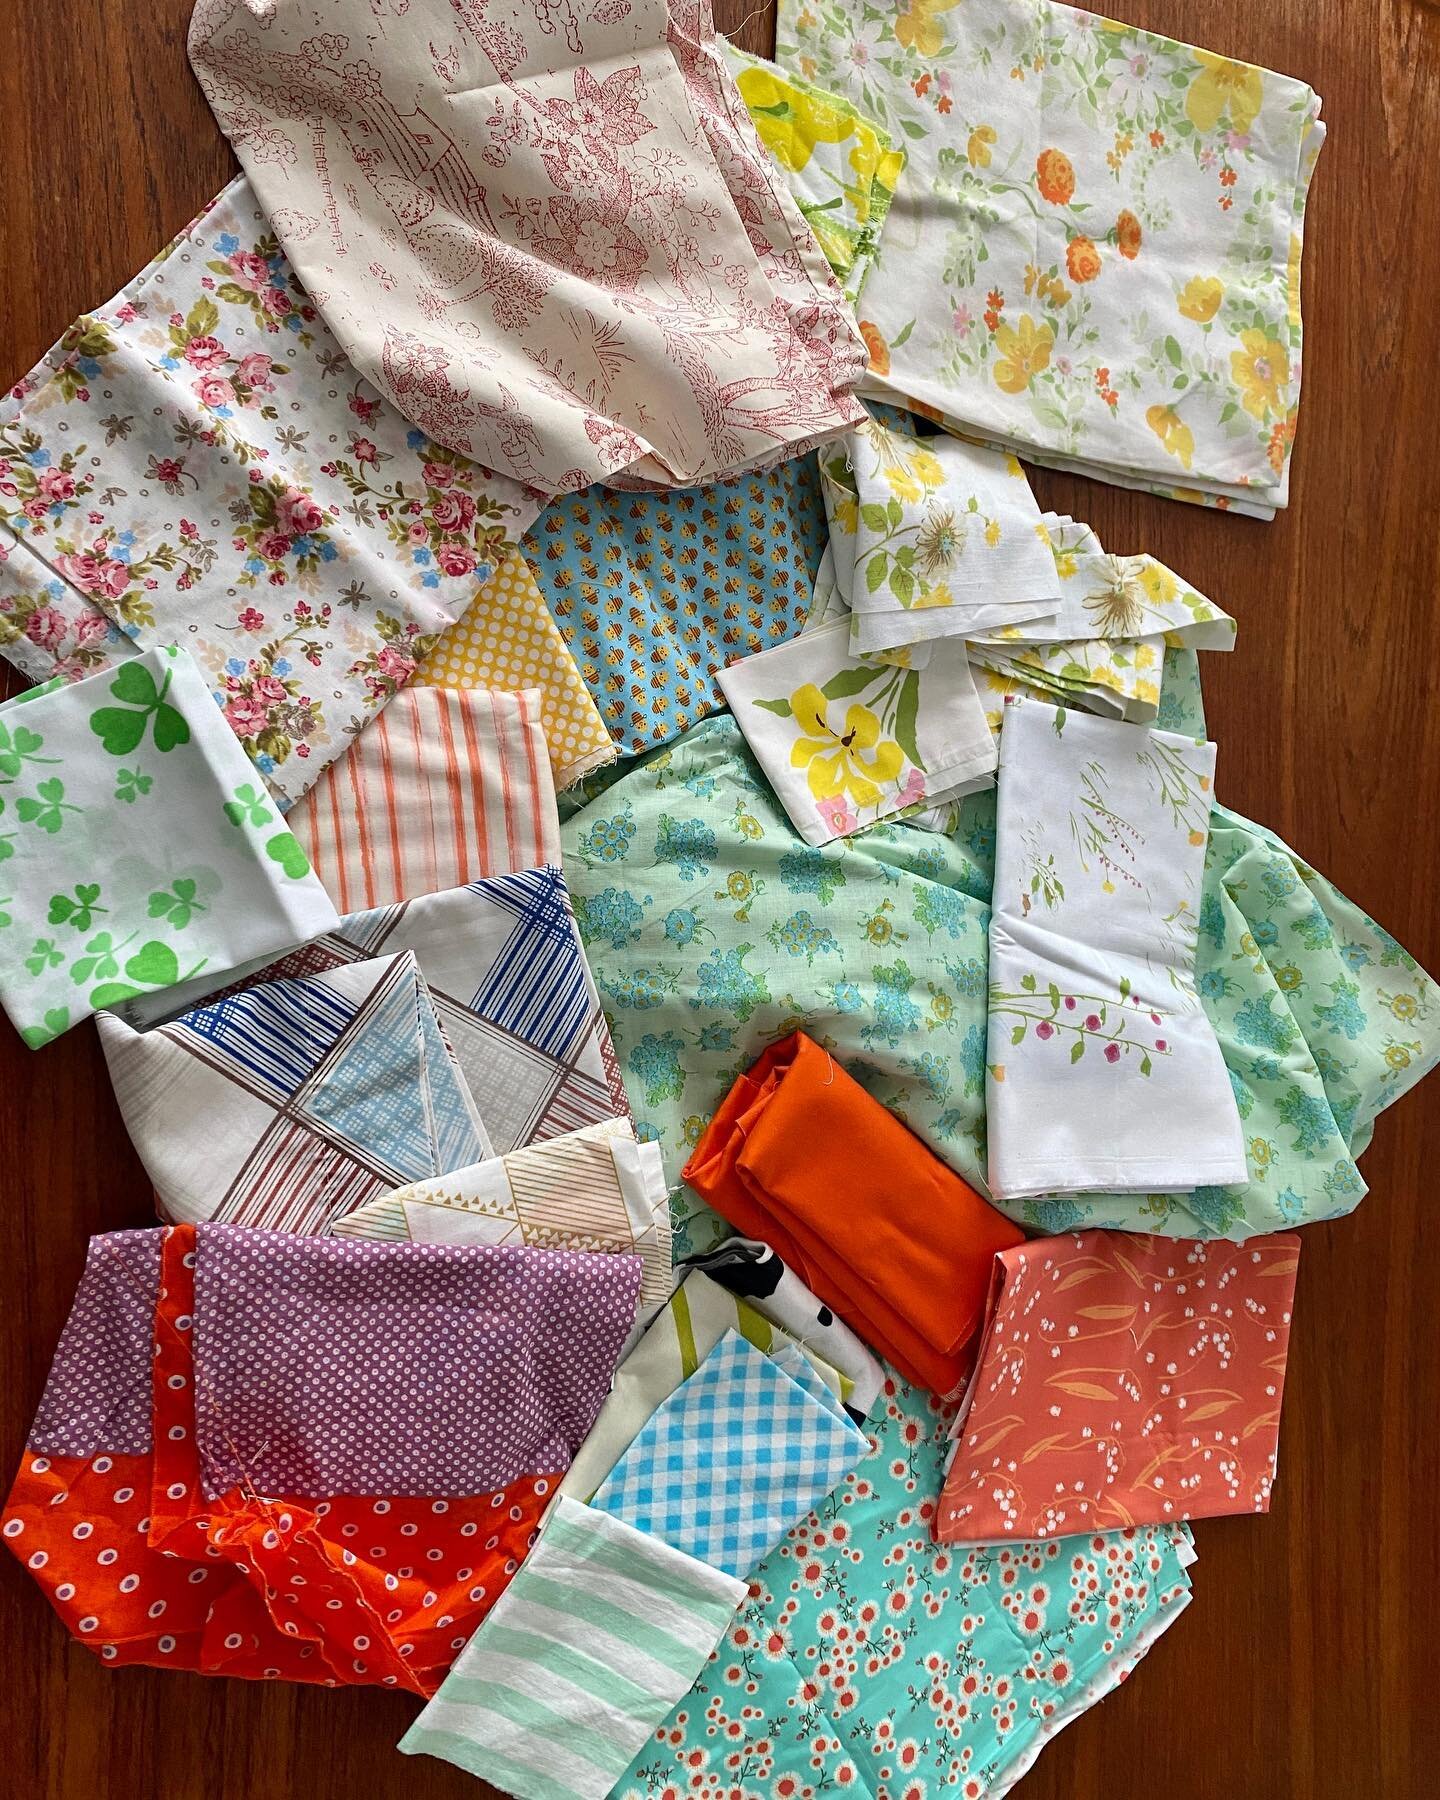 In addition to the obvious landfill-reduction and uniqueness of buying second hand fabric, I&rsquo;m still sometimes blown away by how freaking thrifty it is!
I got yards and yards of the cutest mix today for TEN DOLLARS, which also goes to benefit a